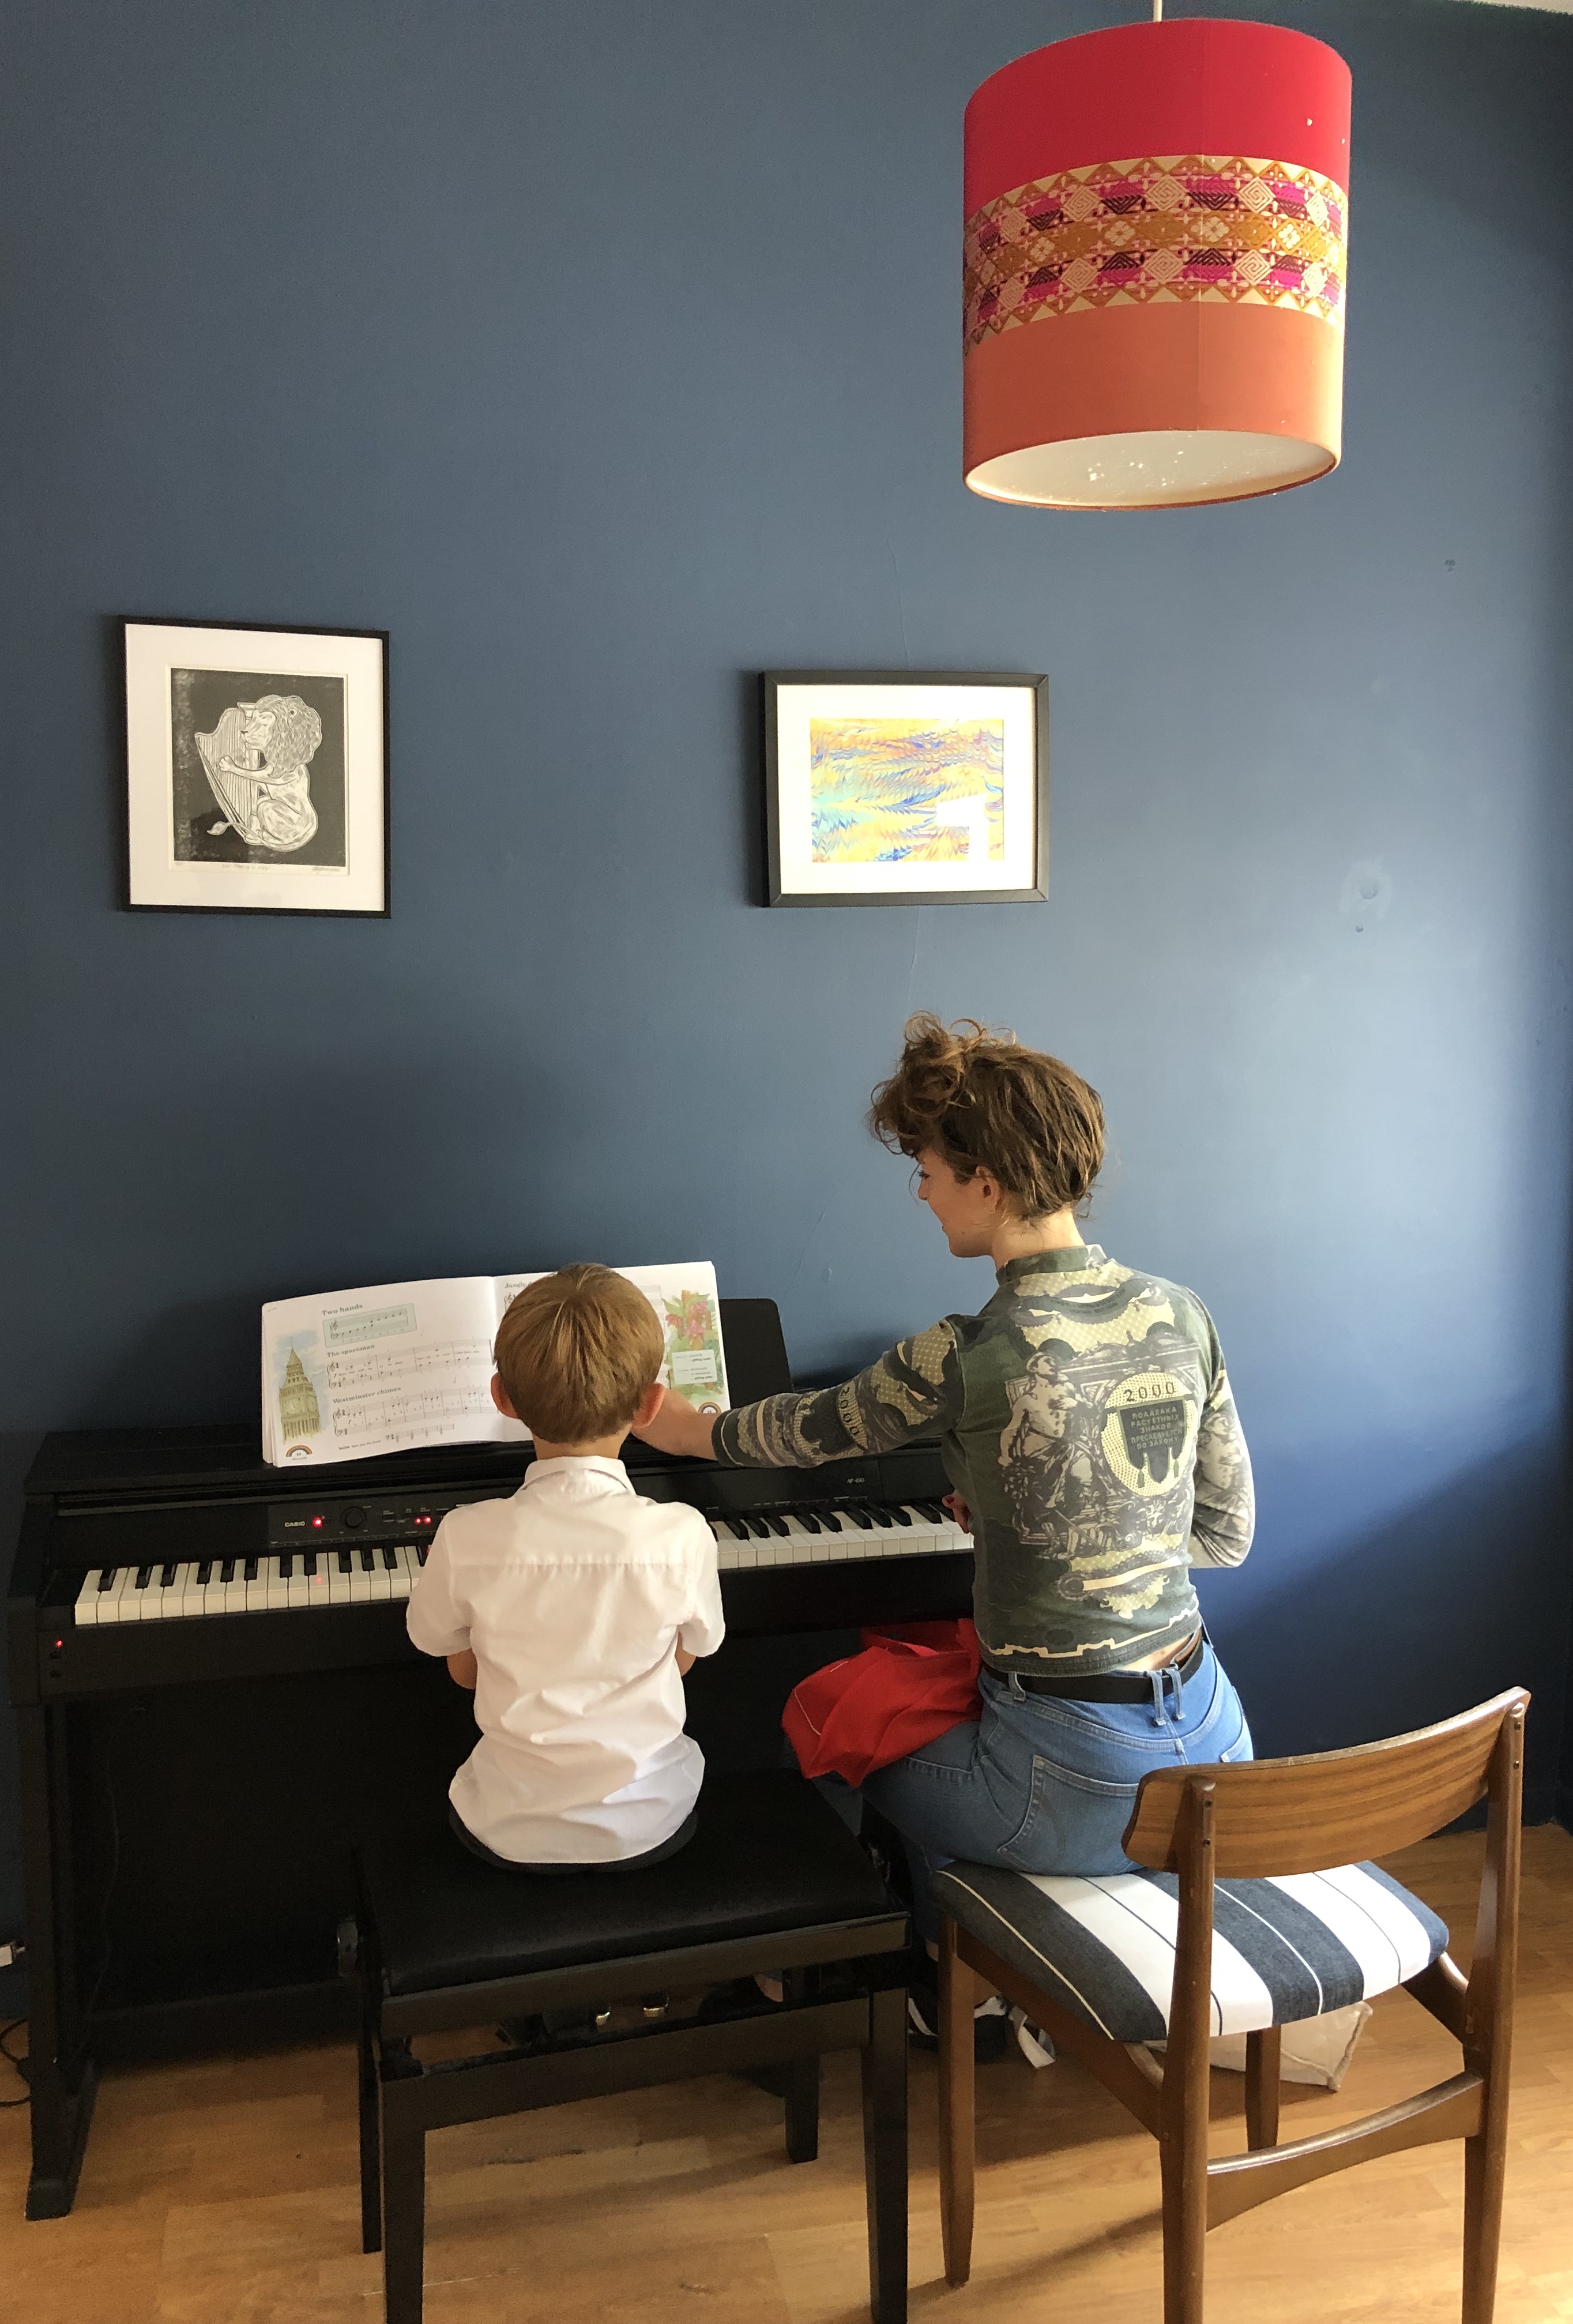 Music Aptitude Test training at the SE22 Piano School in East Dulwich with piano teacher Mirna